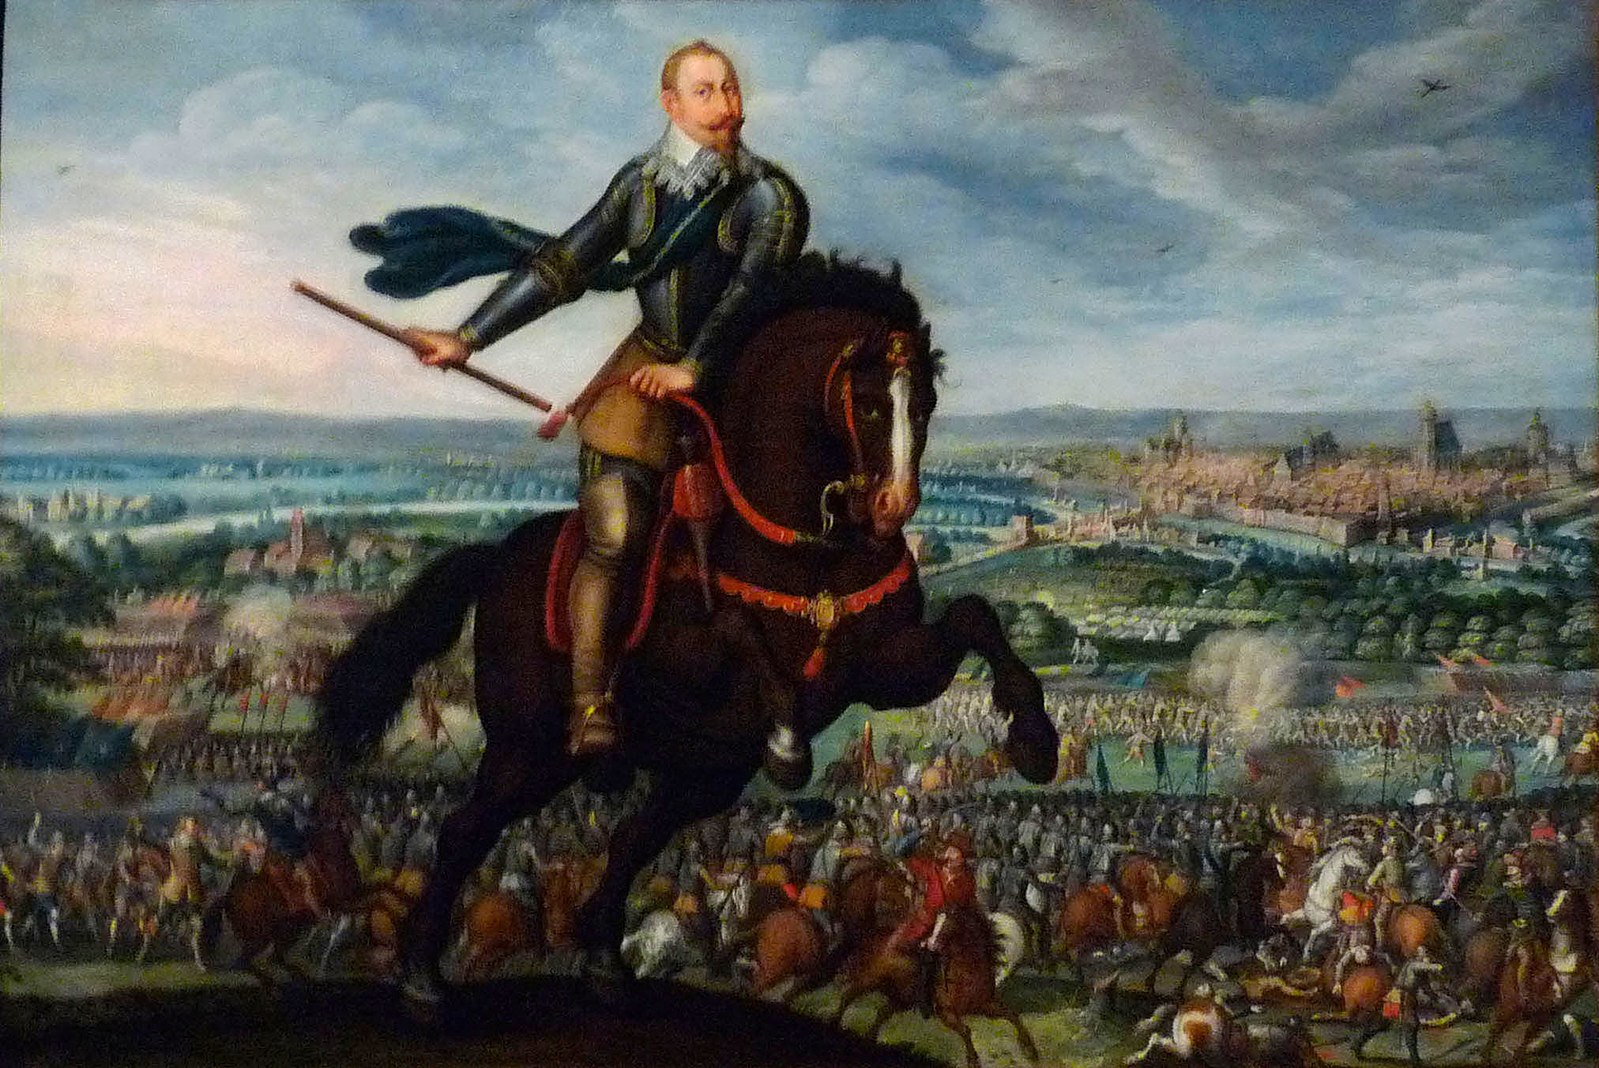 A painting of Gustavas Adolphus on a horse